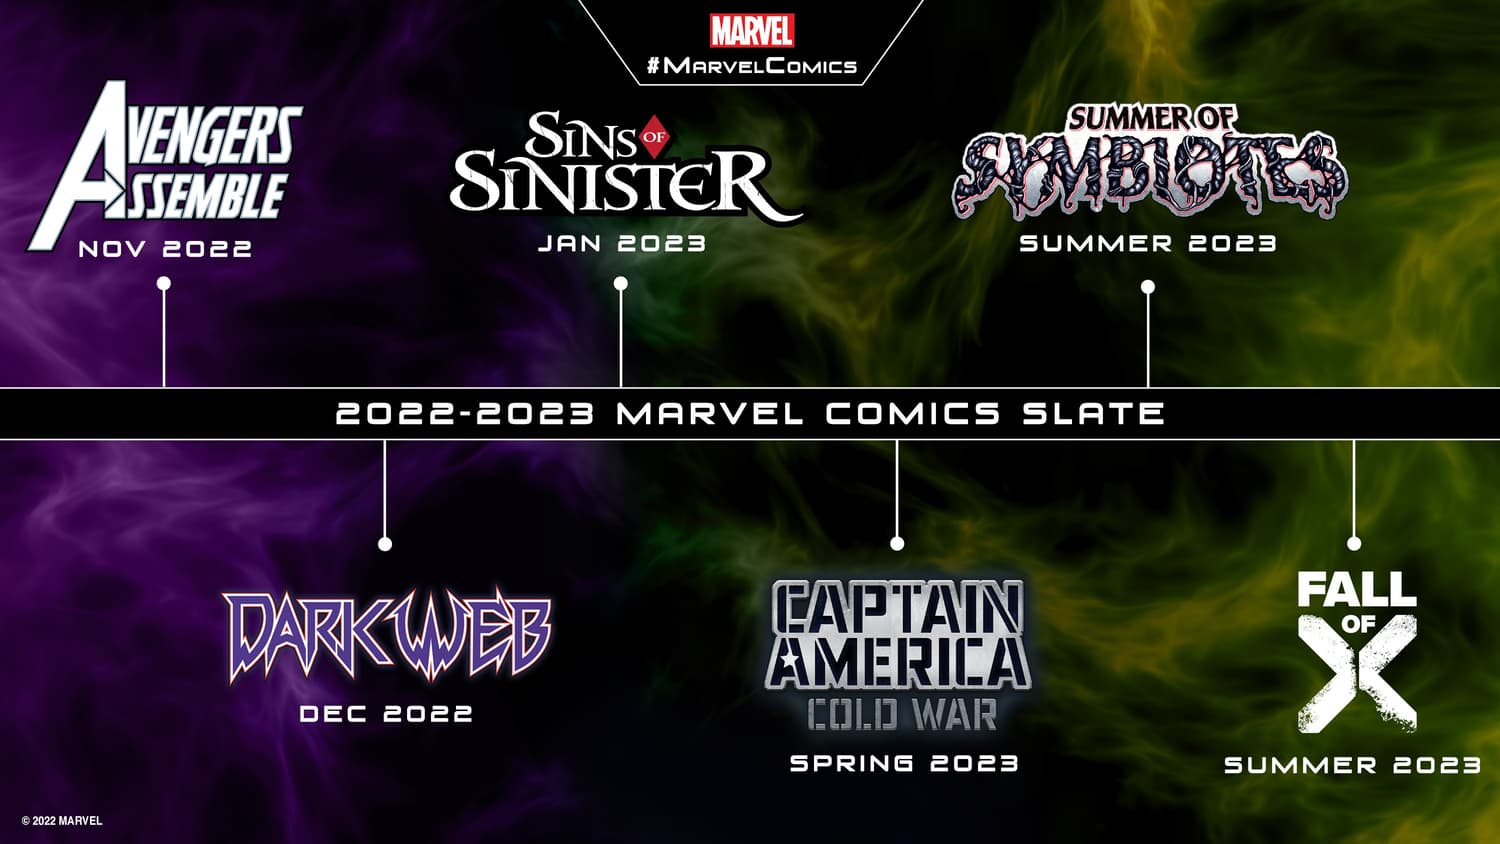 Marvel Comics 2023 Event Slate: Avengers Assemble, Dark Web, Sins of Sinister, Captain America: Cold War, Summer of Symbiotes, and Fall of X